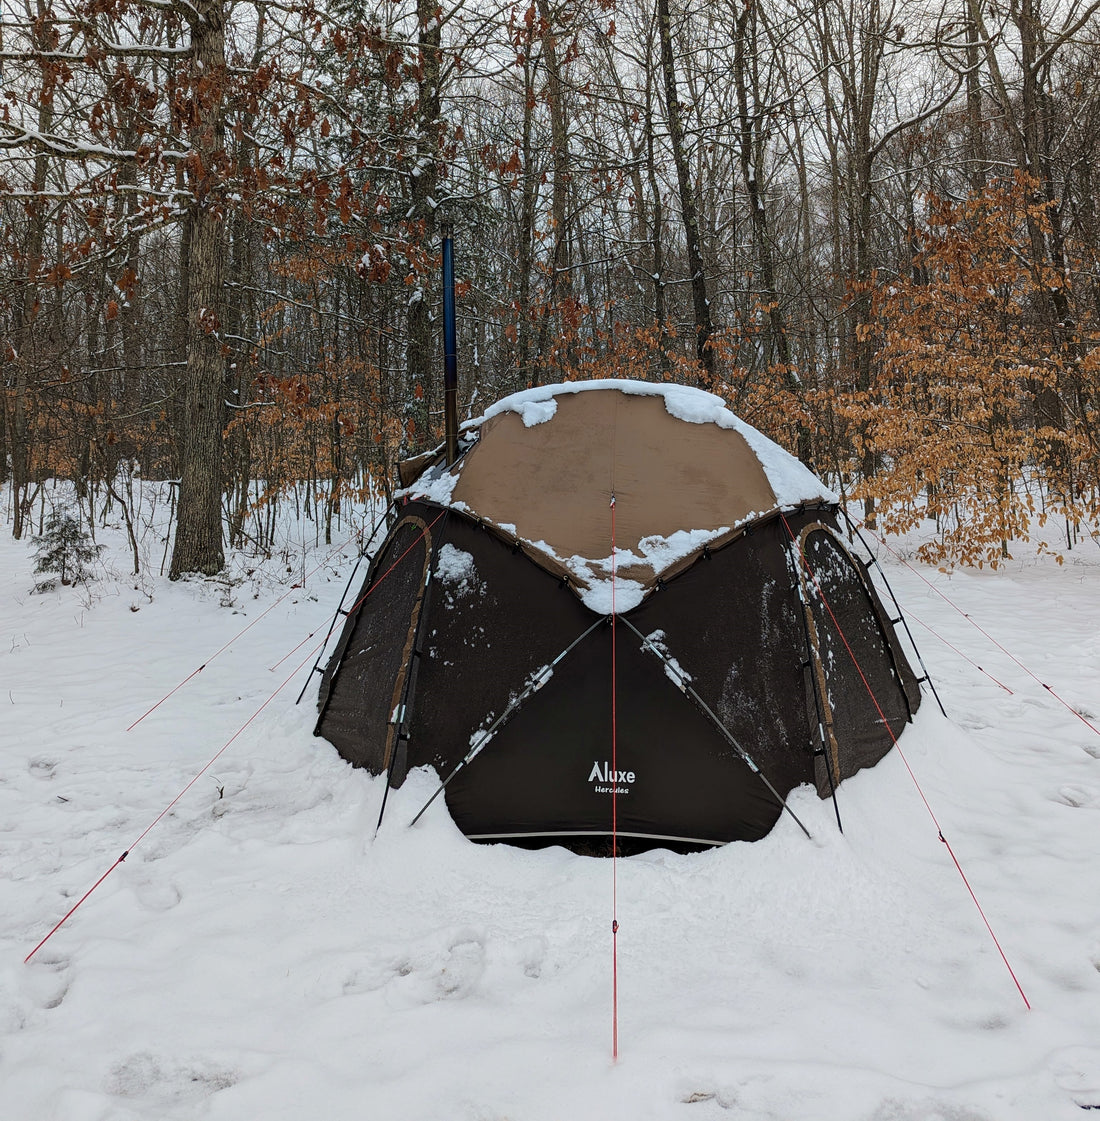 Hercules Hot Tent with stove in snow